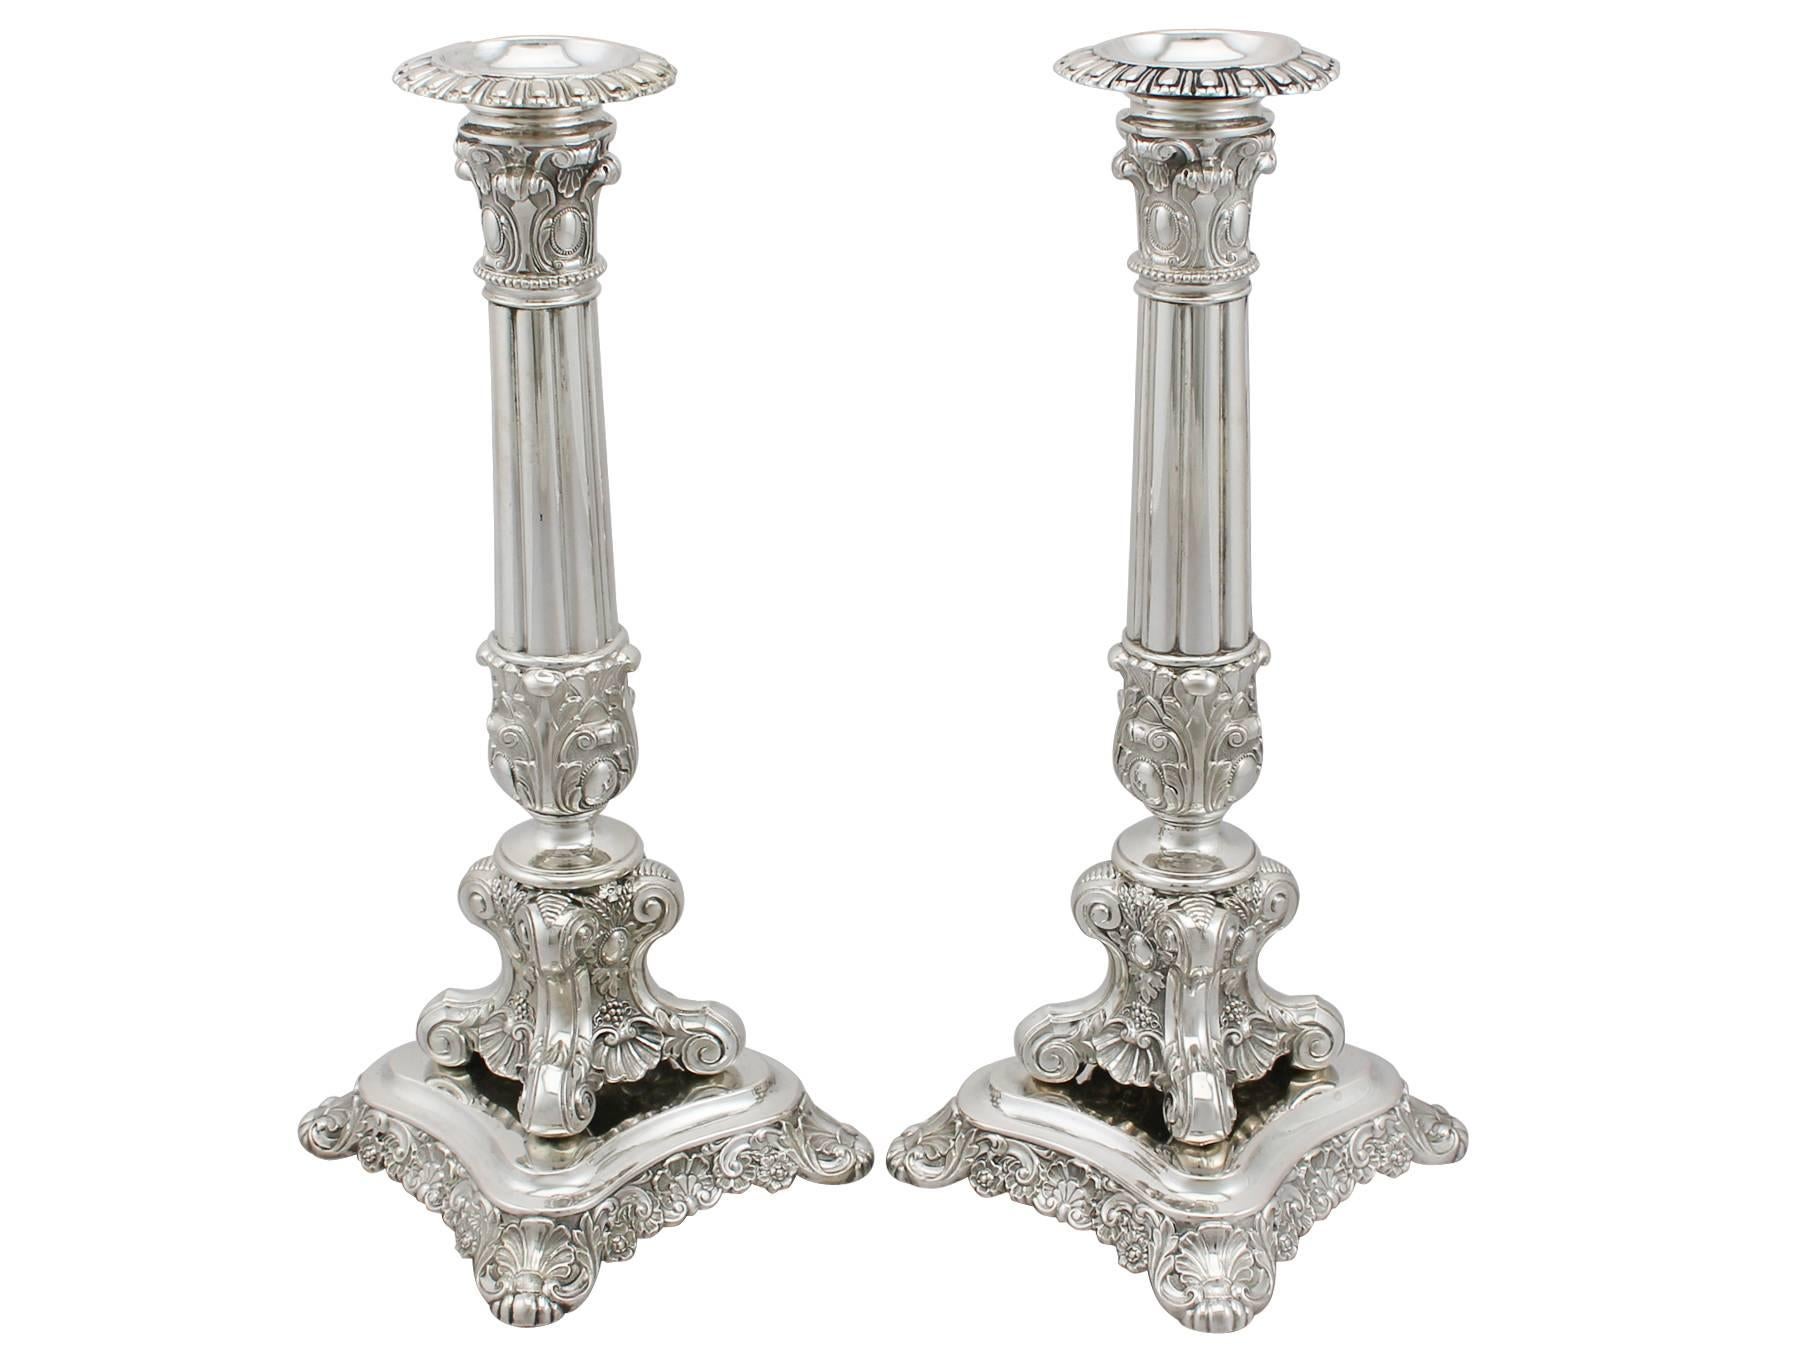 A fine and impressive pair of antique German silver candlesticks; an addition to our ornamental silverware collection

These antique German silver candlesticks have a circular shaped form to a scrolling boss and rounded base.

The candlesticks